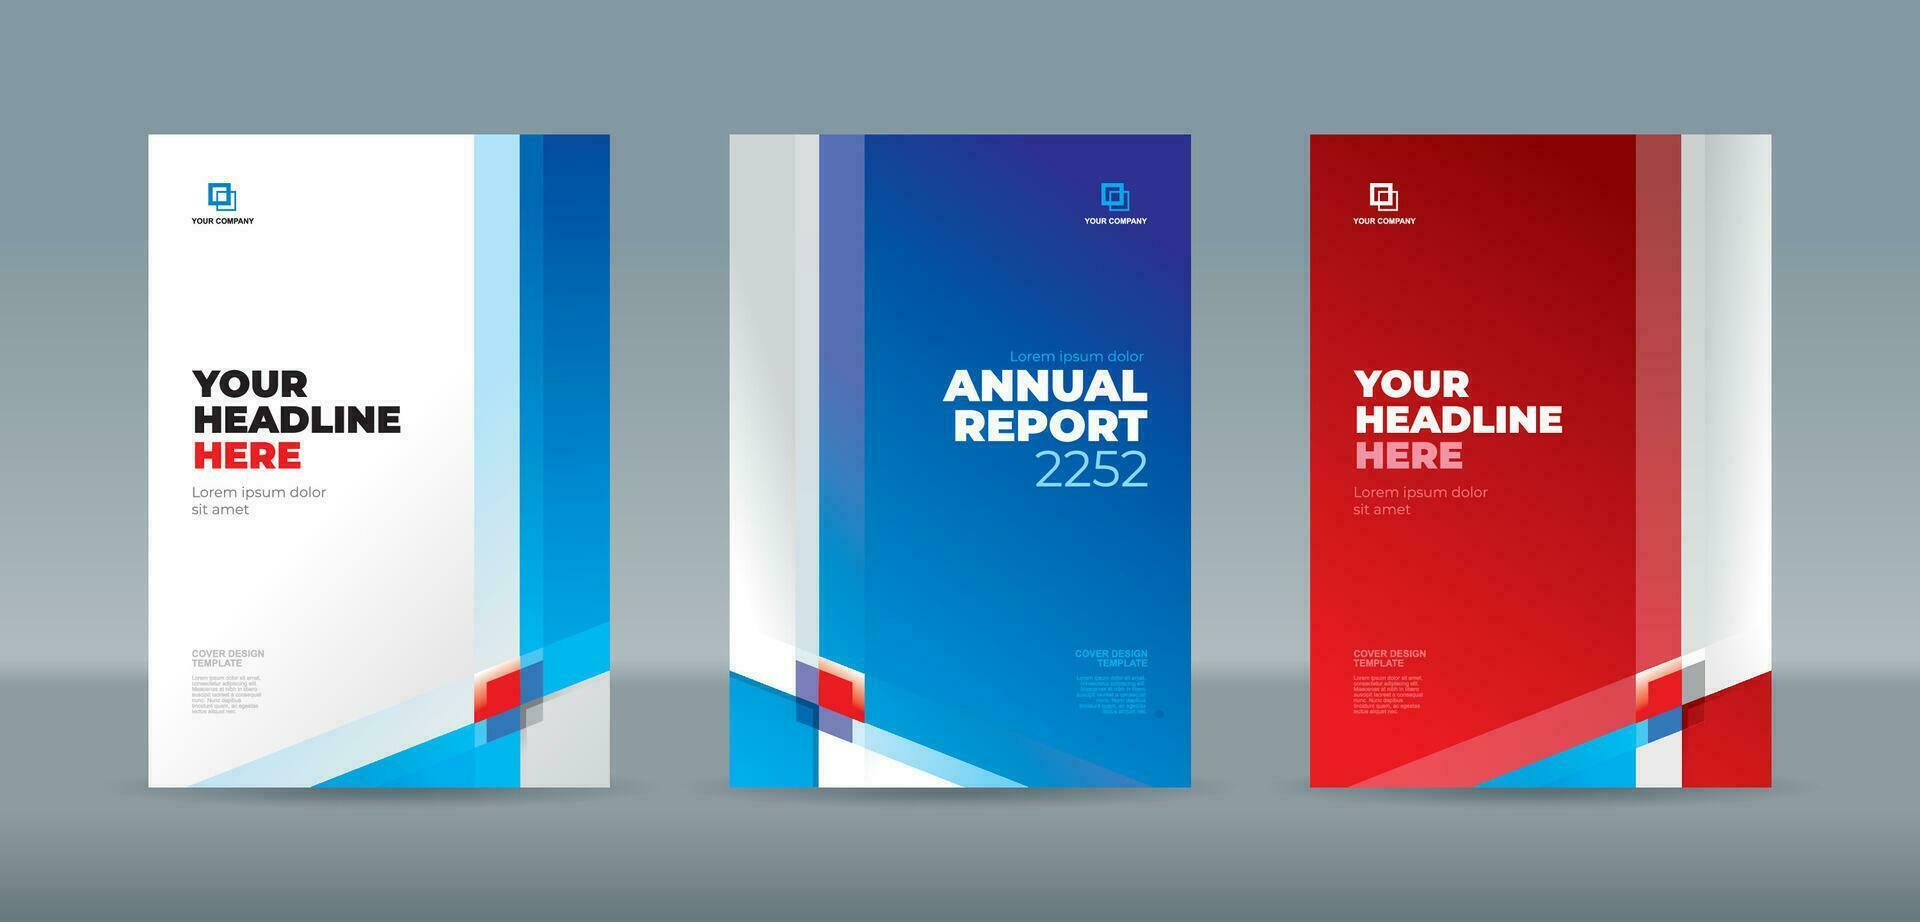 Modern square and triangle shape red, blue and white color theme, A4 sized book cover template for annual report, magazine, booklet, proposal, portfolio, brochure, poster, company profile vector